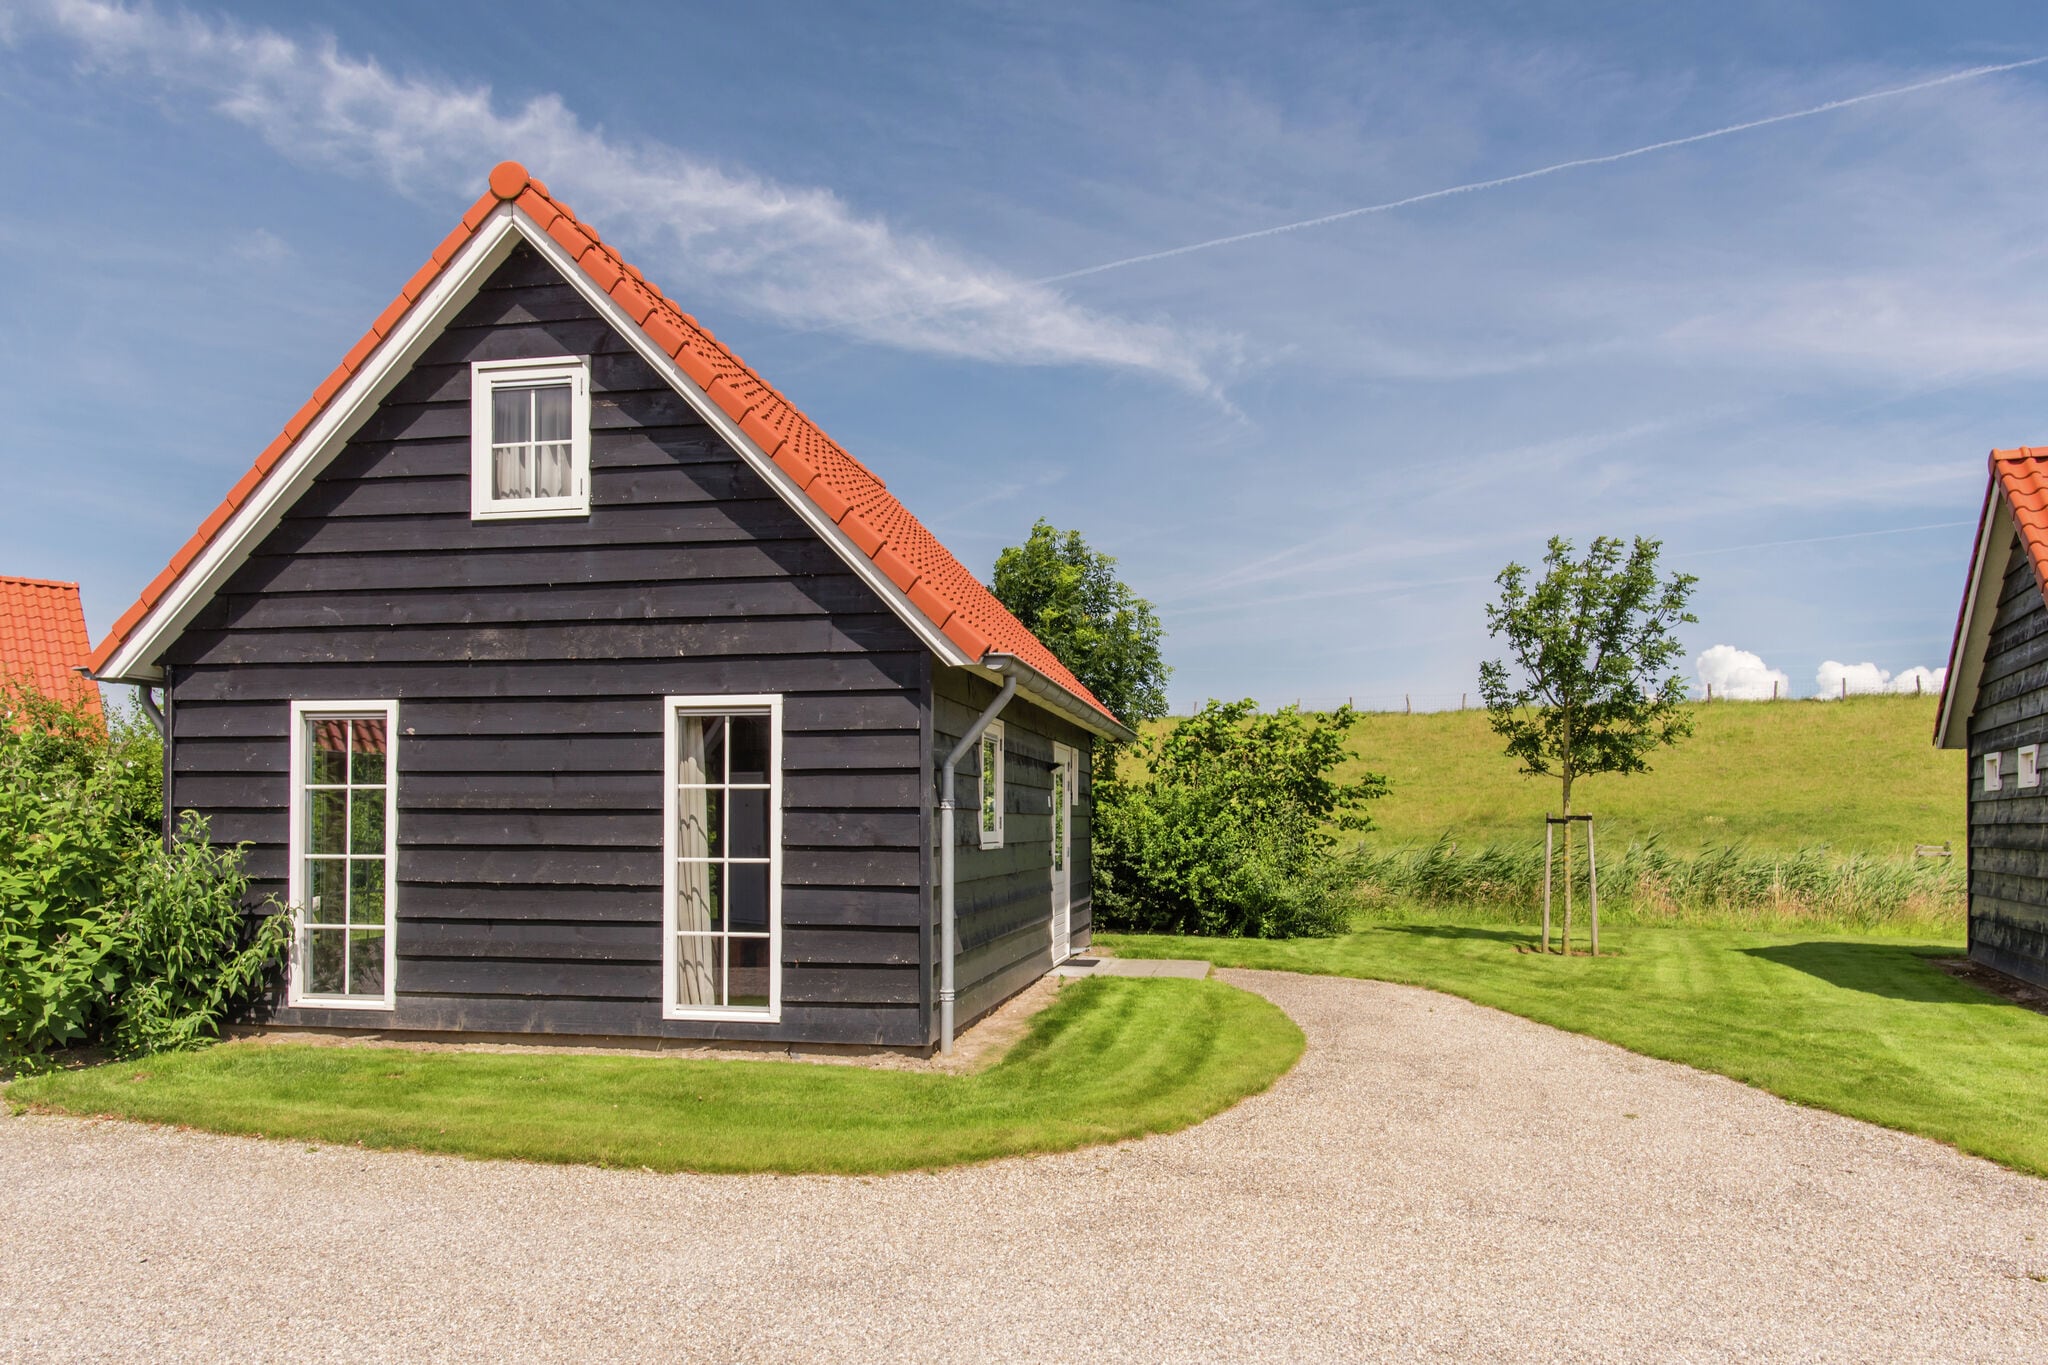 Holiday home with three bedrooms, in Zeeland